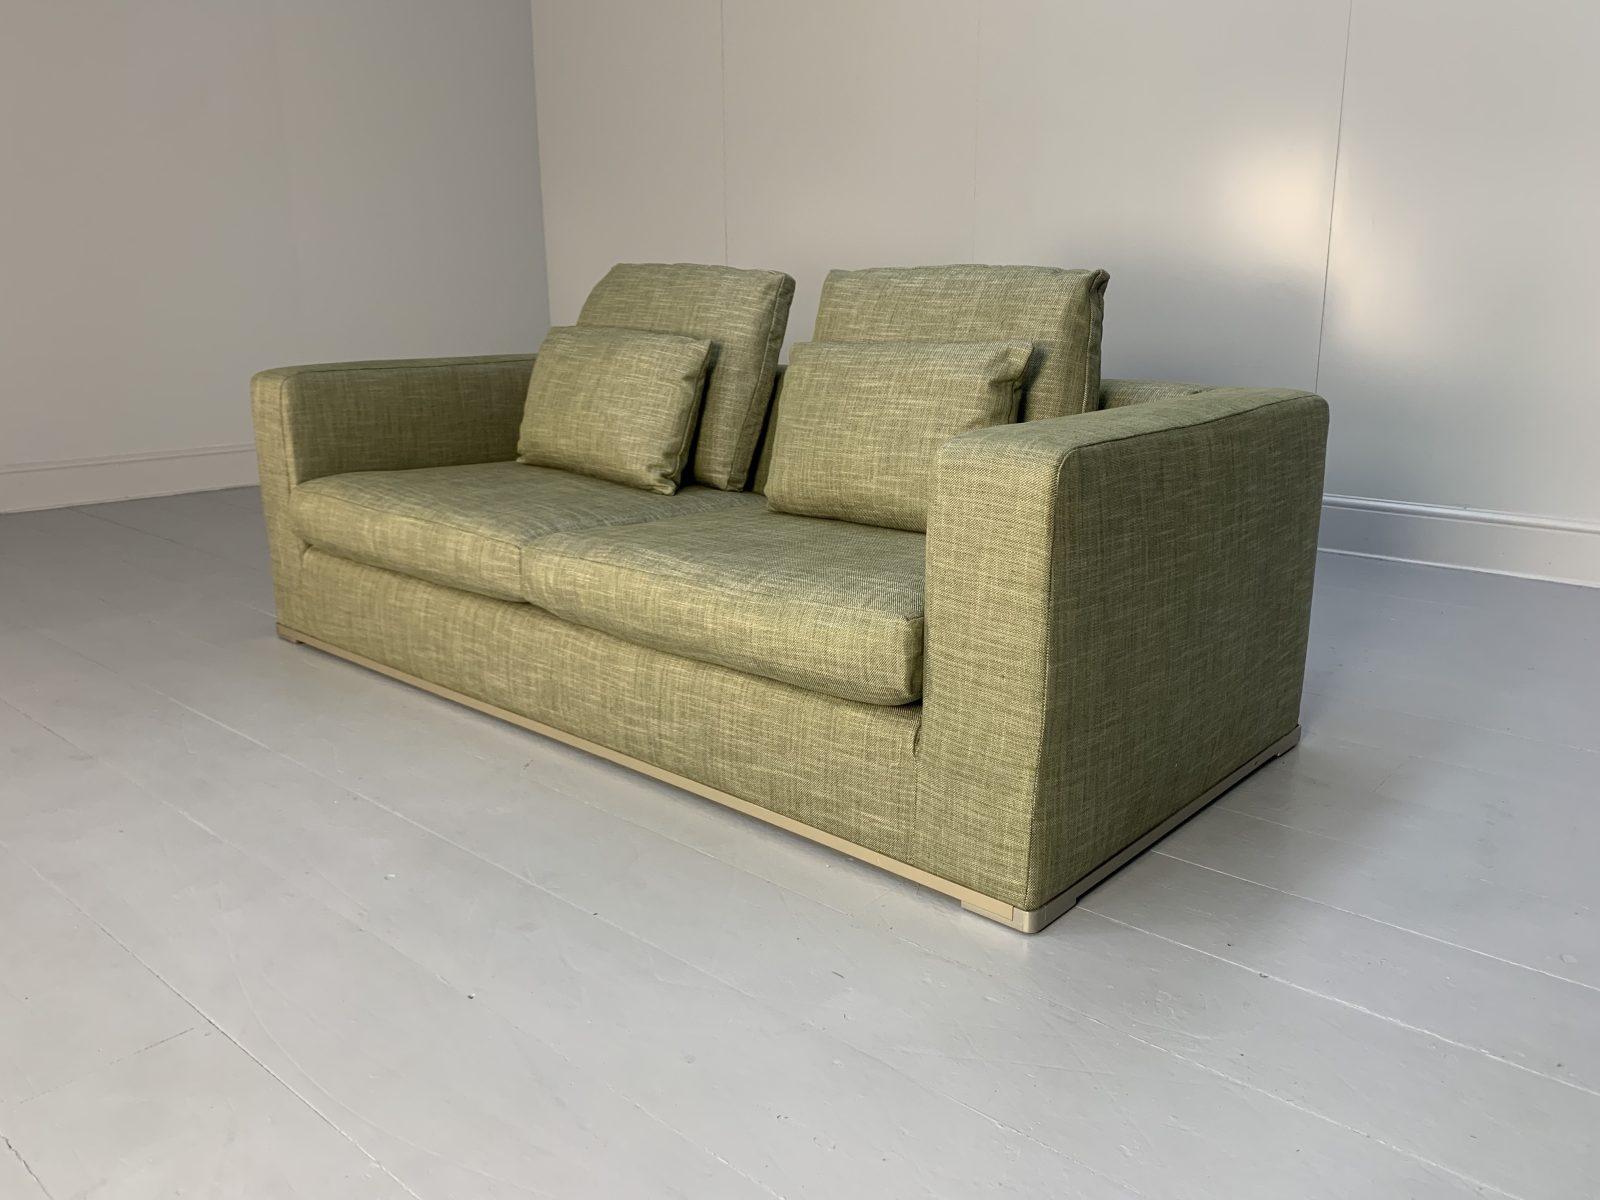 Pair of B&B Italia “Omnia” Sofas, 2.5-Seat, in Pale Green Linen For Sale 9